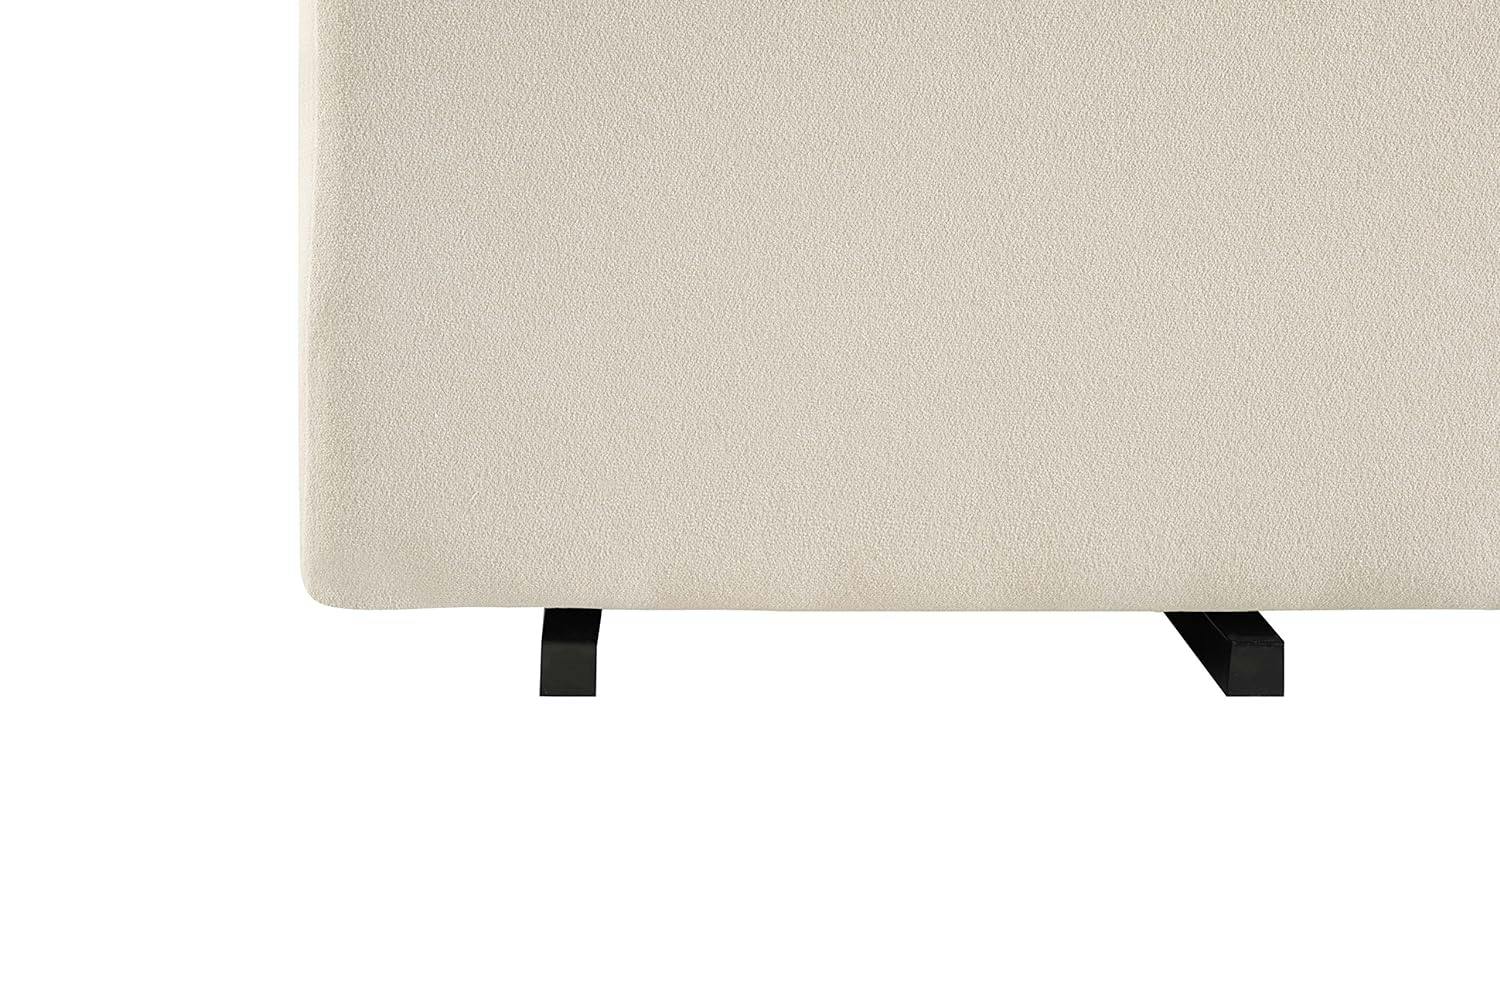 Cream Gliding Ottoman with Smooth Back and Forth Motion